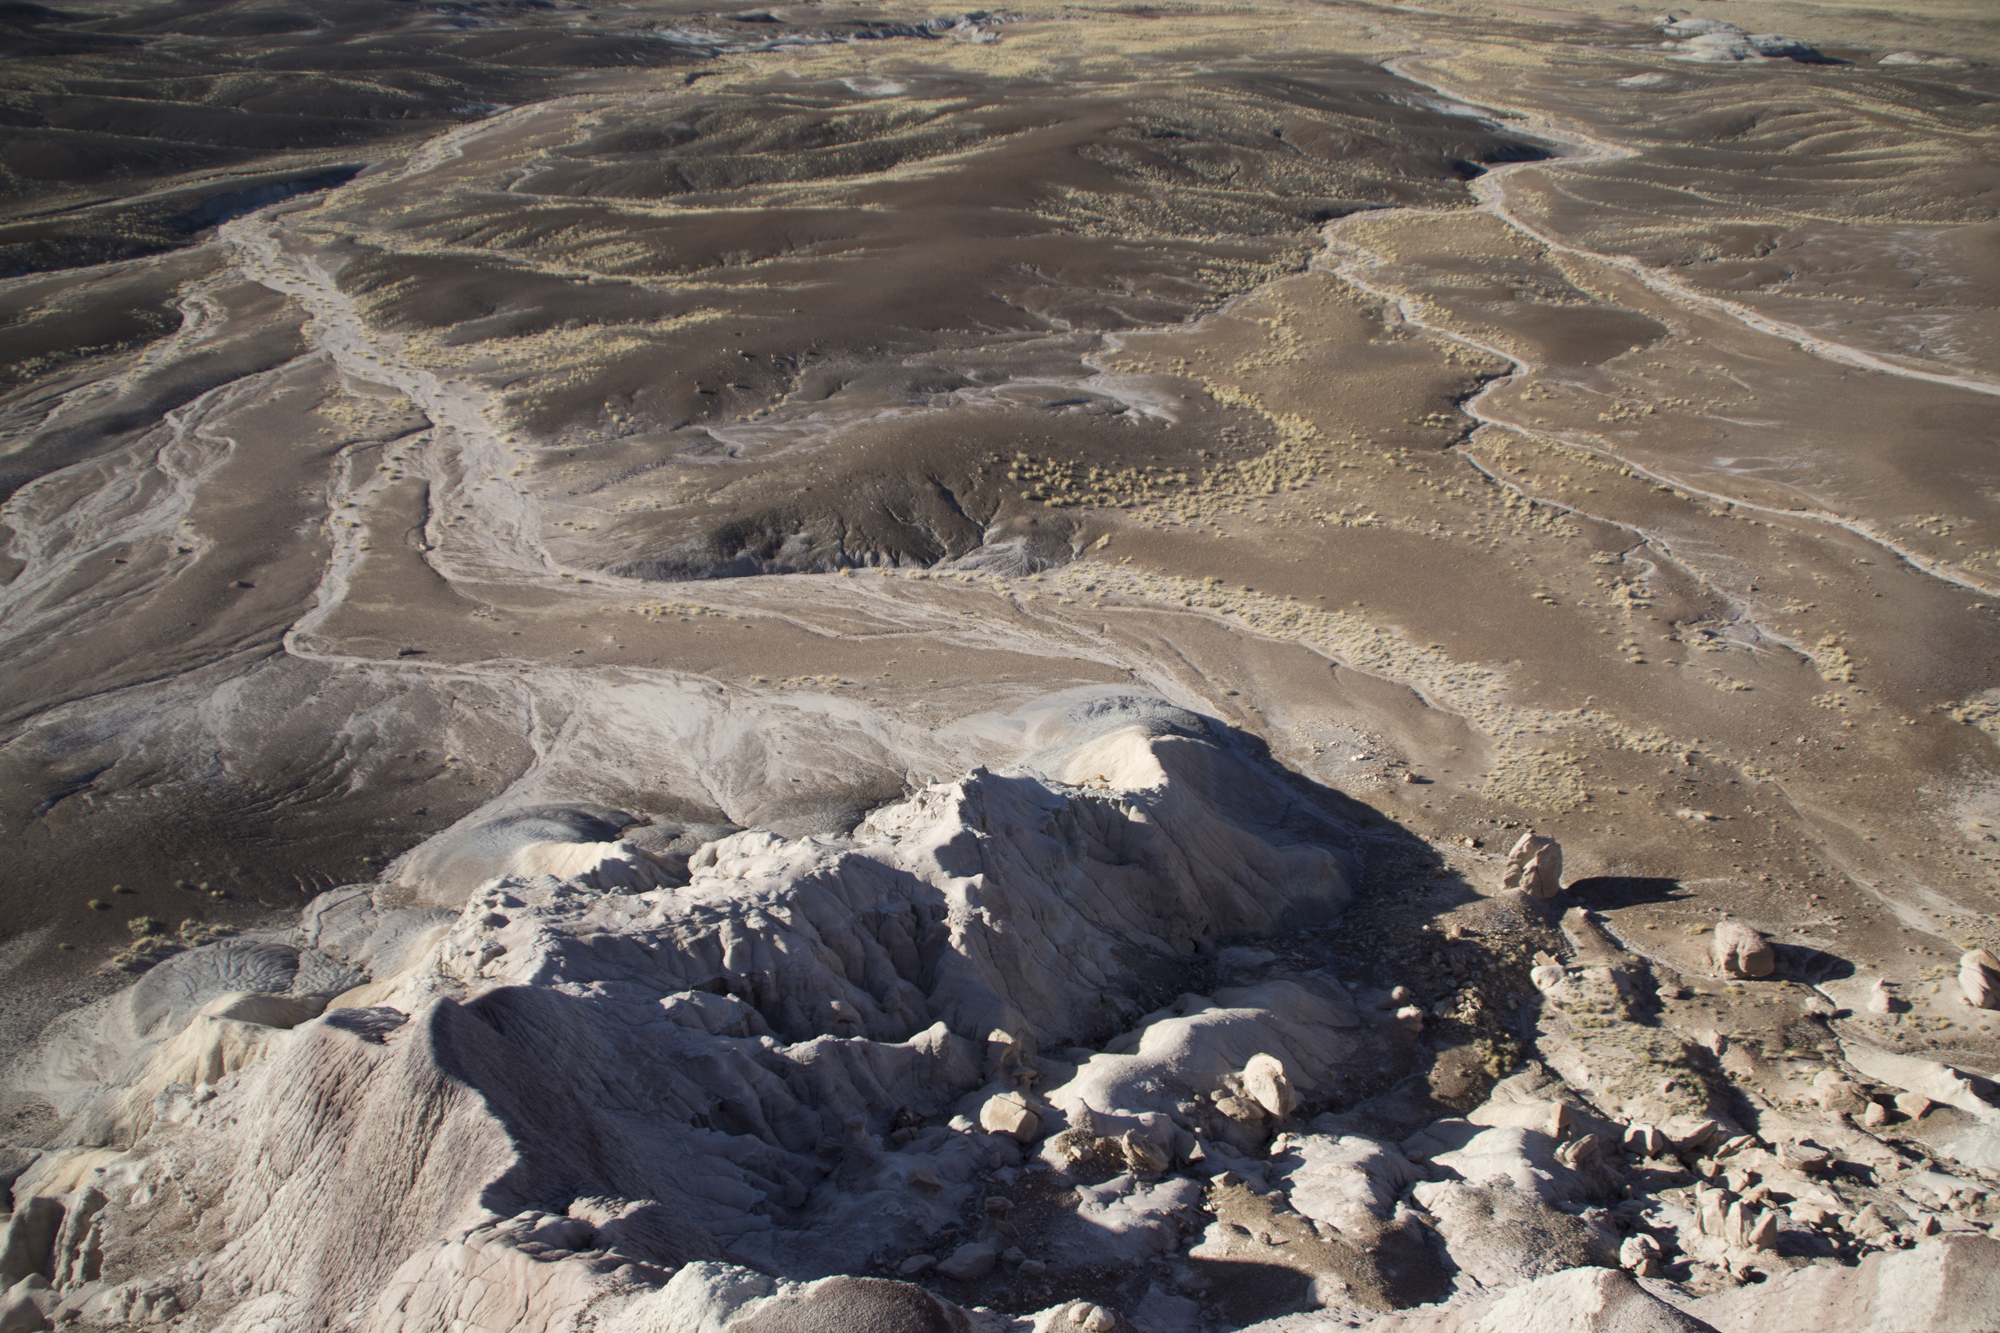  Looking down from Blue Mesa, Petrified Forest National Park 